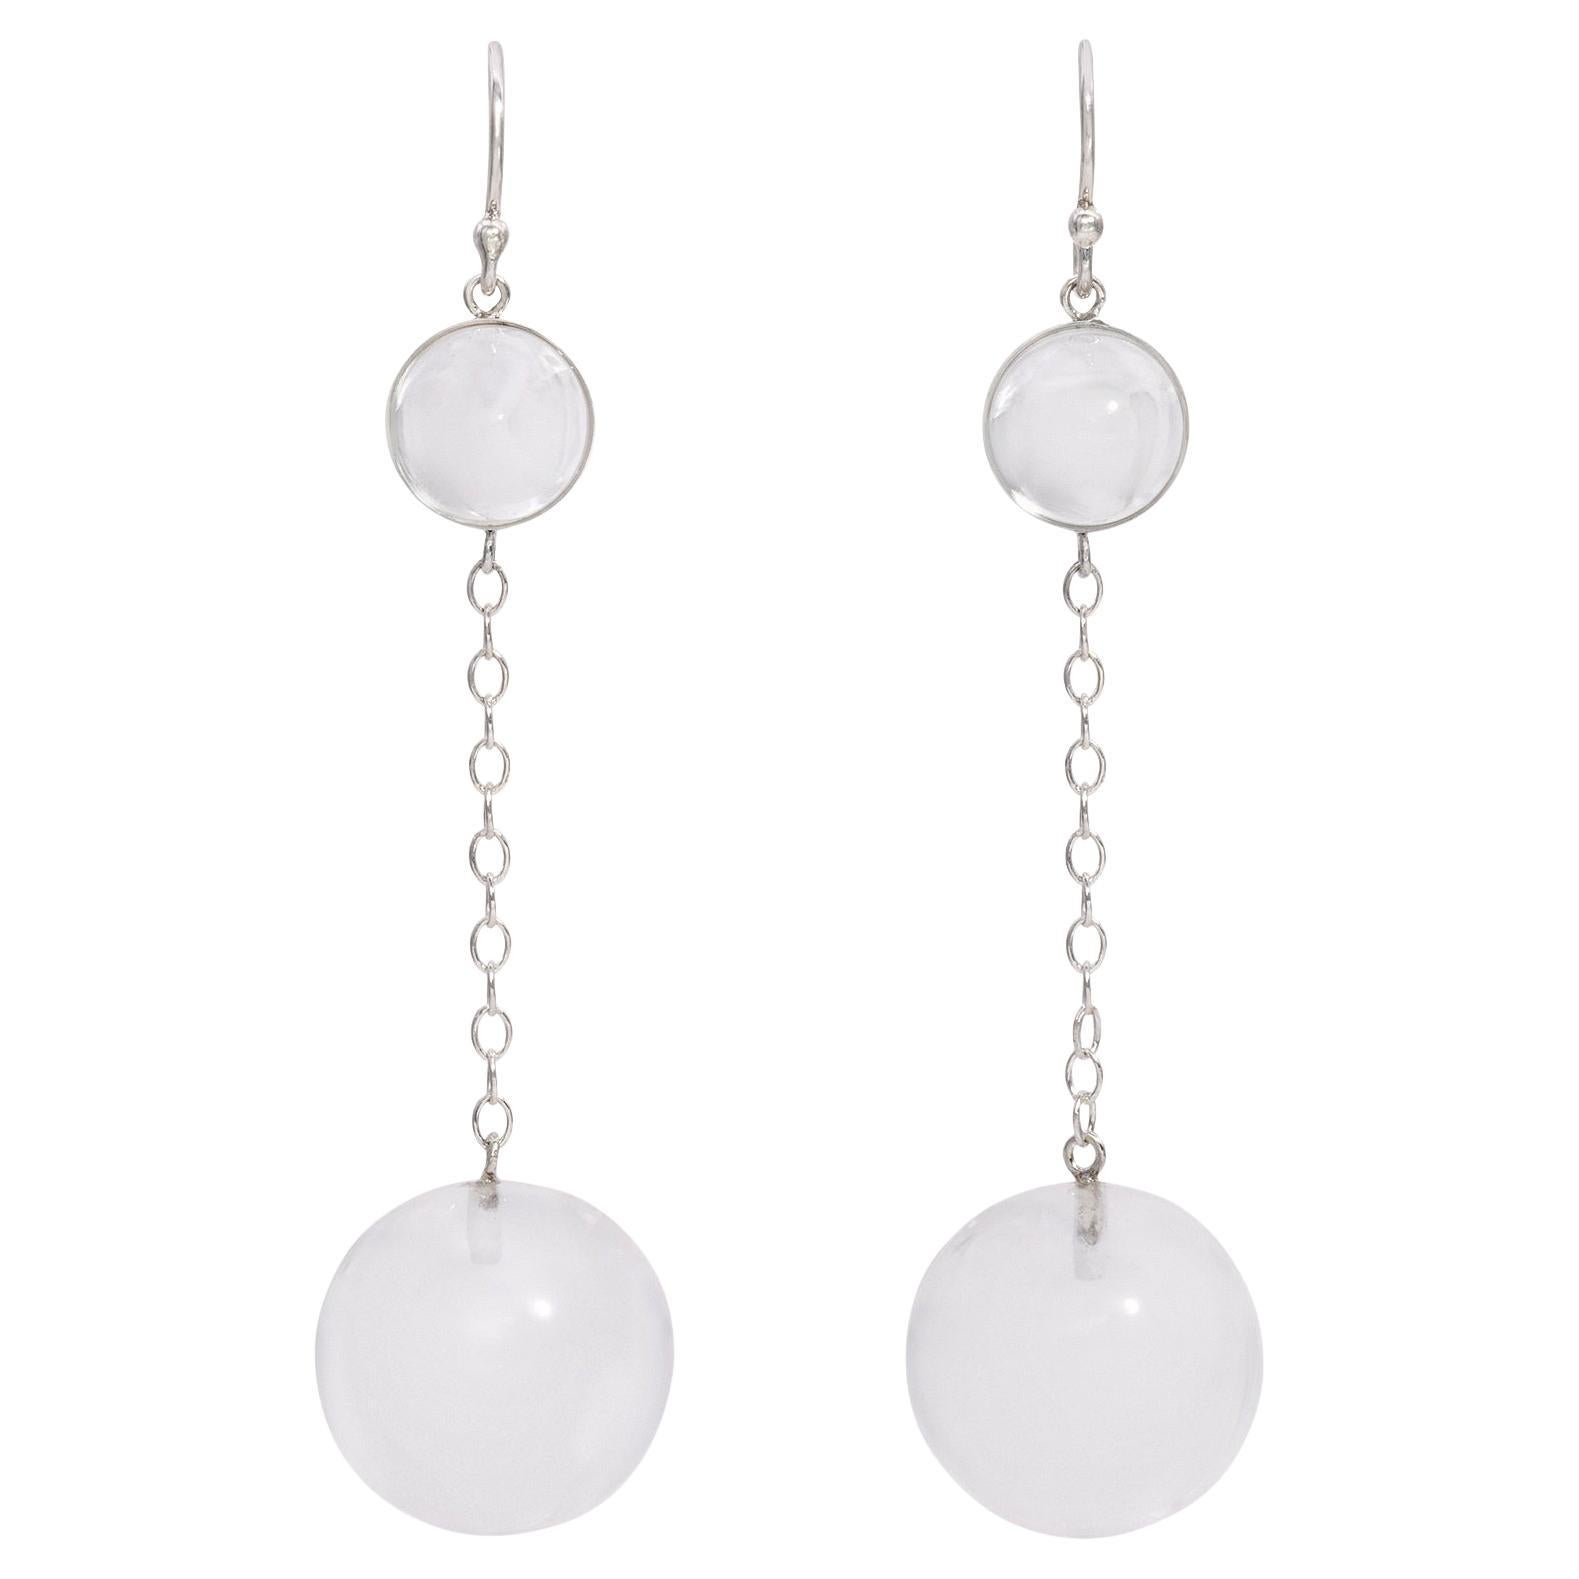 Chic Rock Crystal Ball Drop Earrings rom April in Paris Designs For Sale